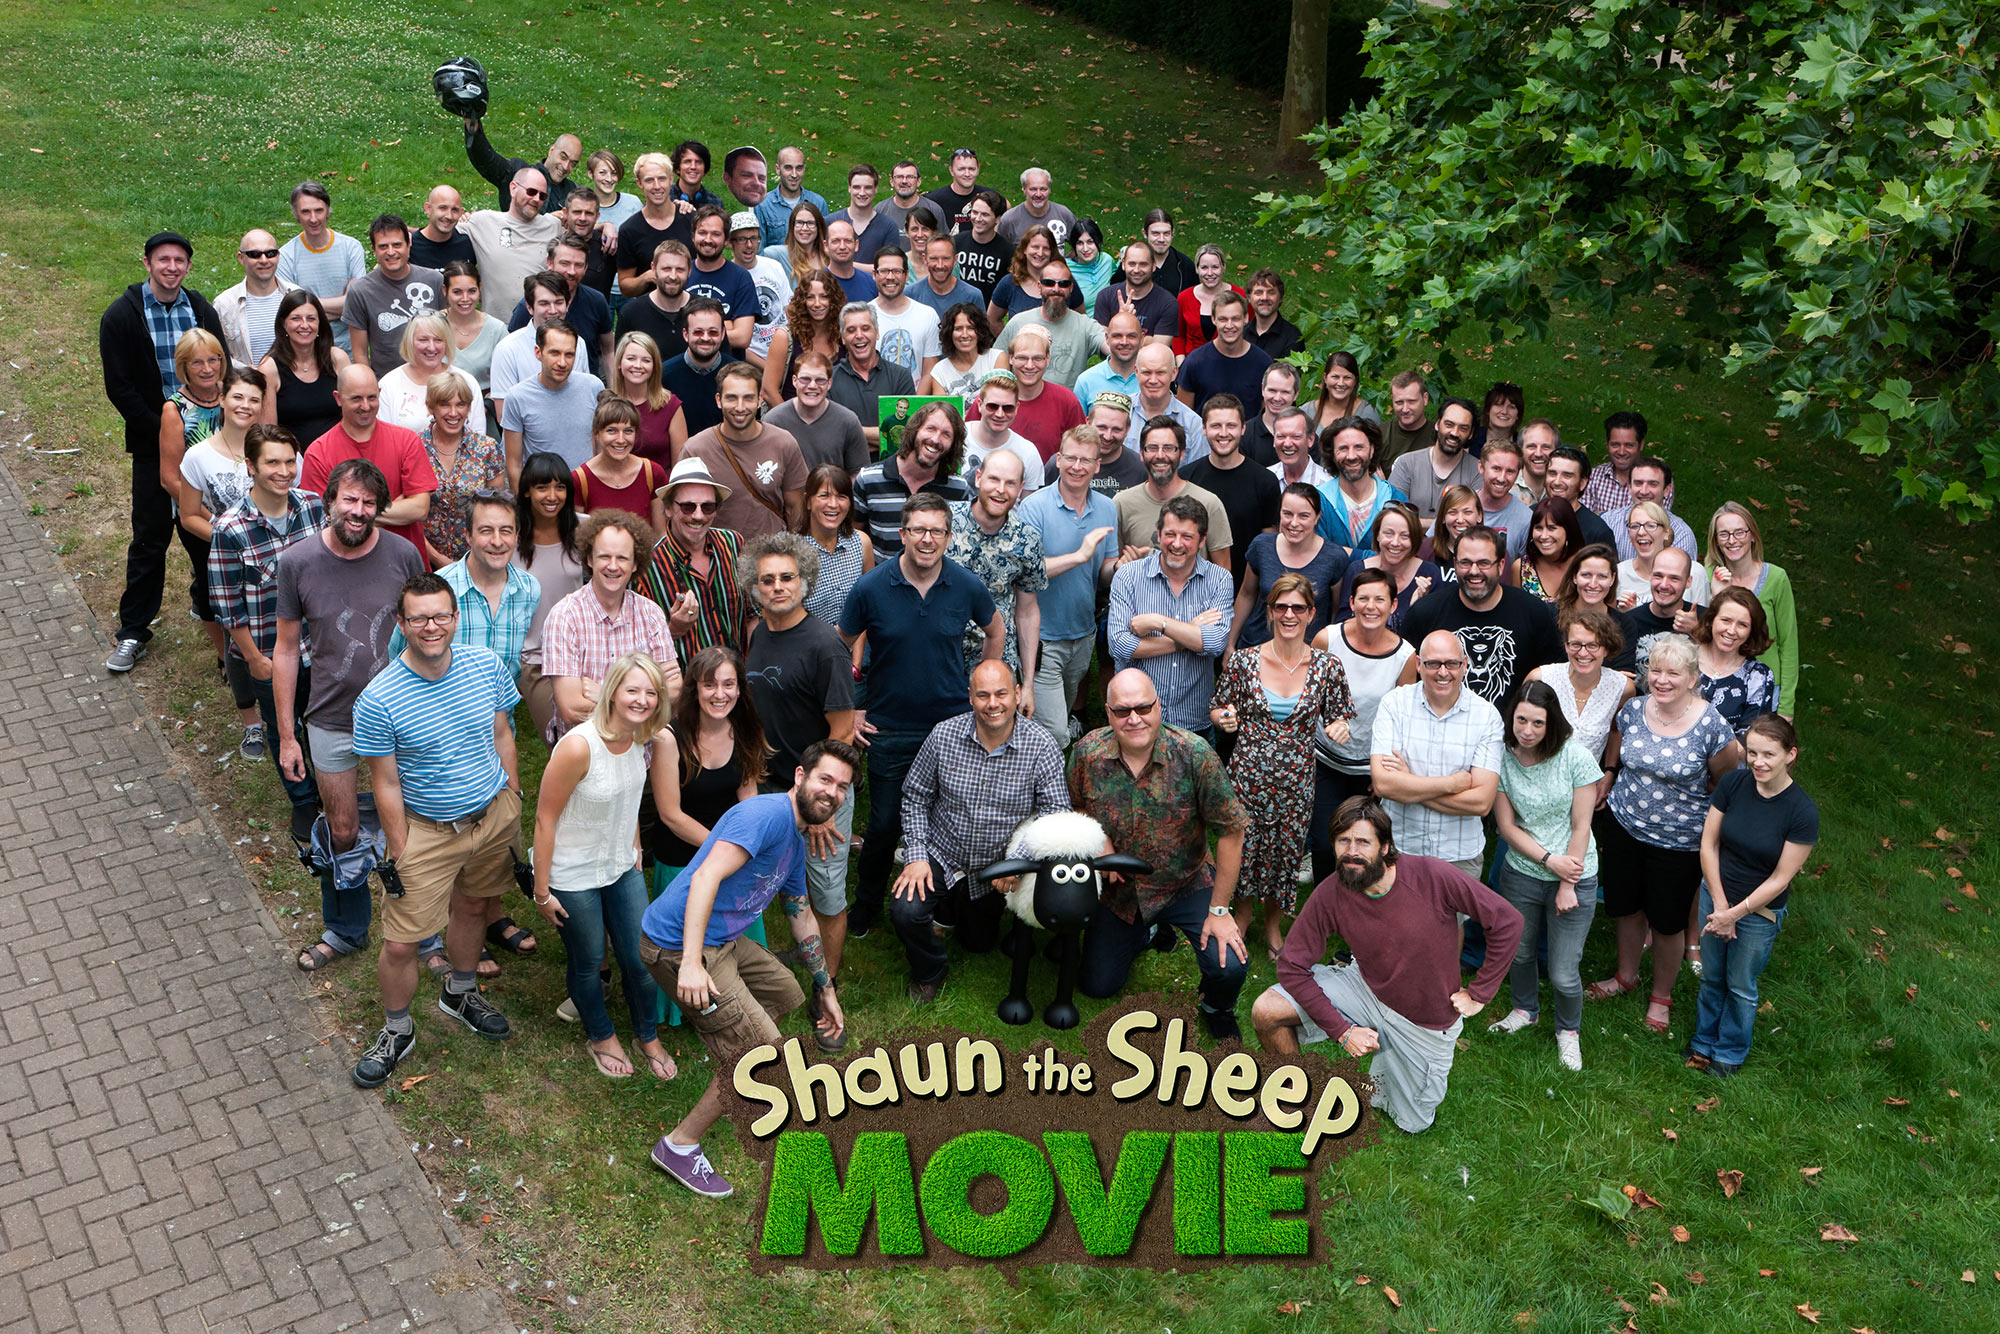 A photo of the movie's crew. Click to enlarge. (Photo: Chris Johnson)